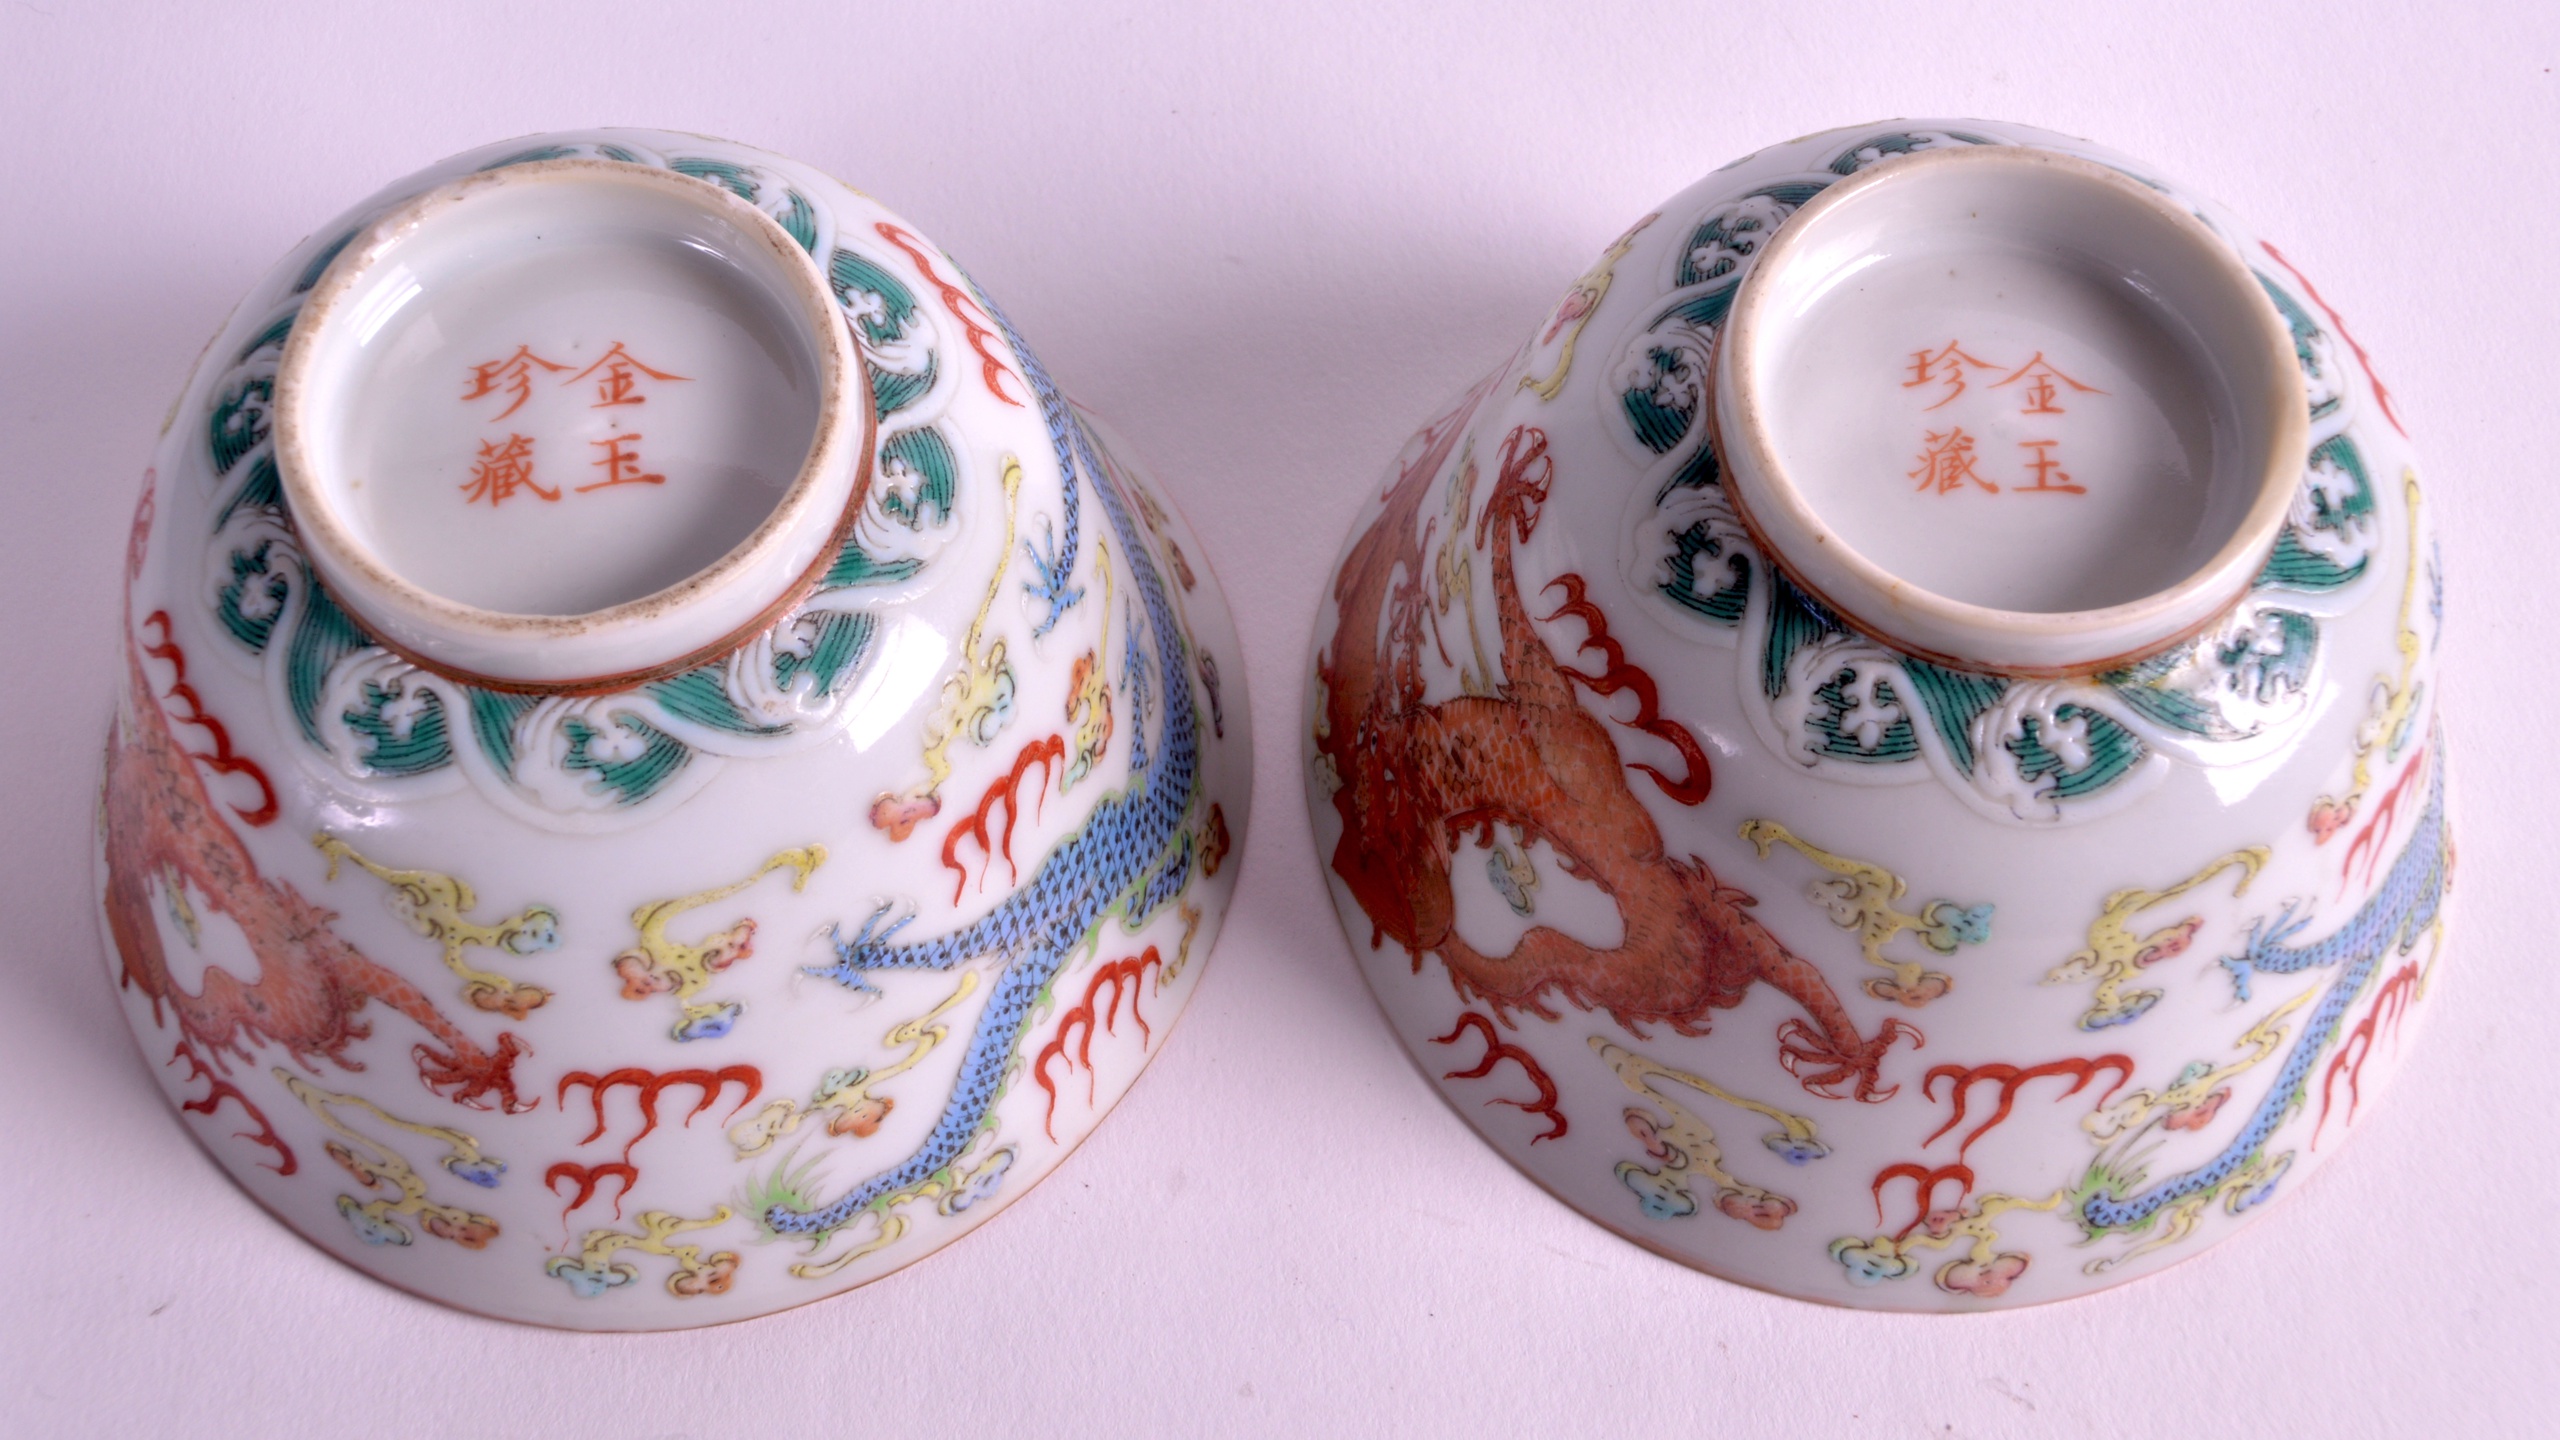 A PAIR OF EARLY 20TH CENTURY CHINESE FAMILLE ROSE BOWLS painted with dragons amongst clouds. 4Ins - Image 3 of 3